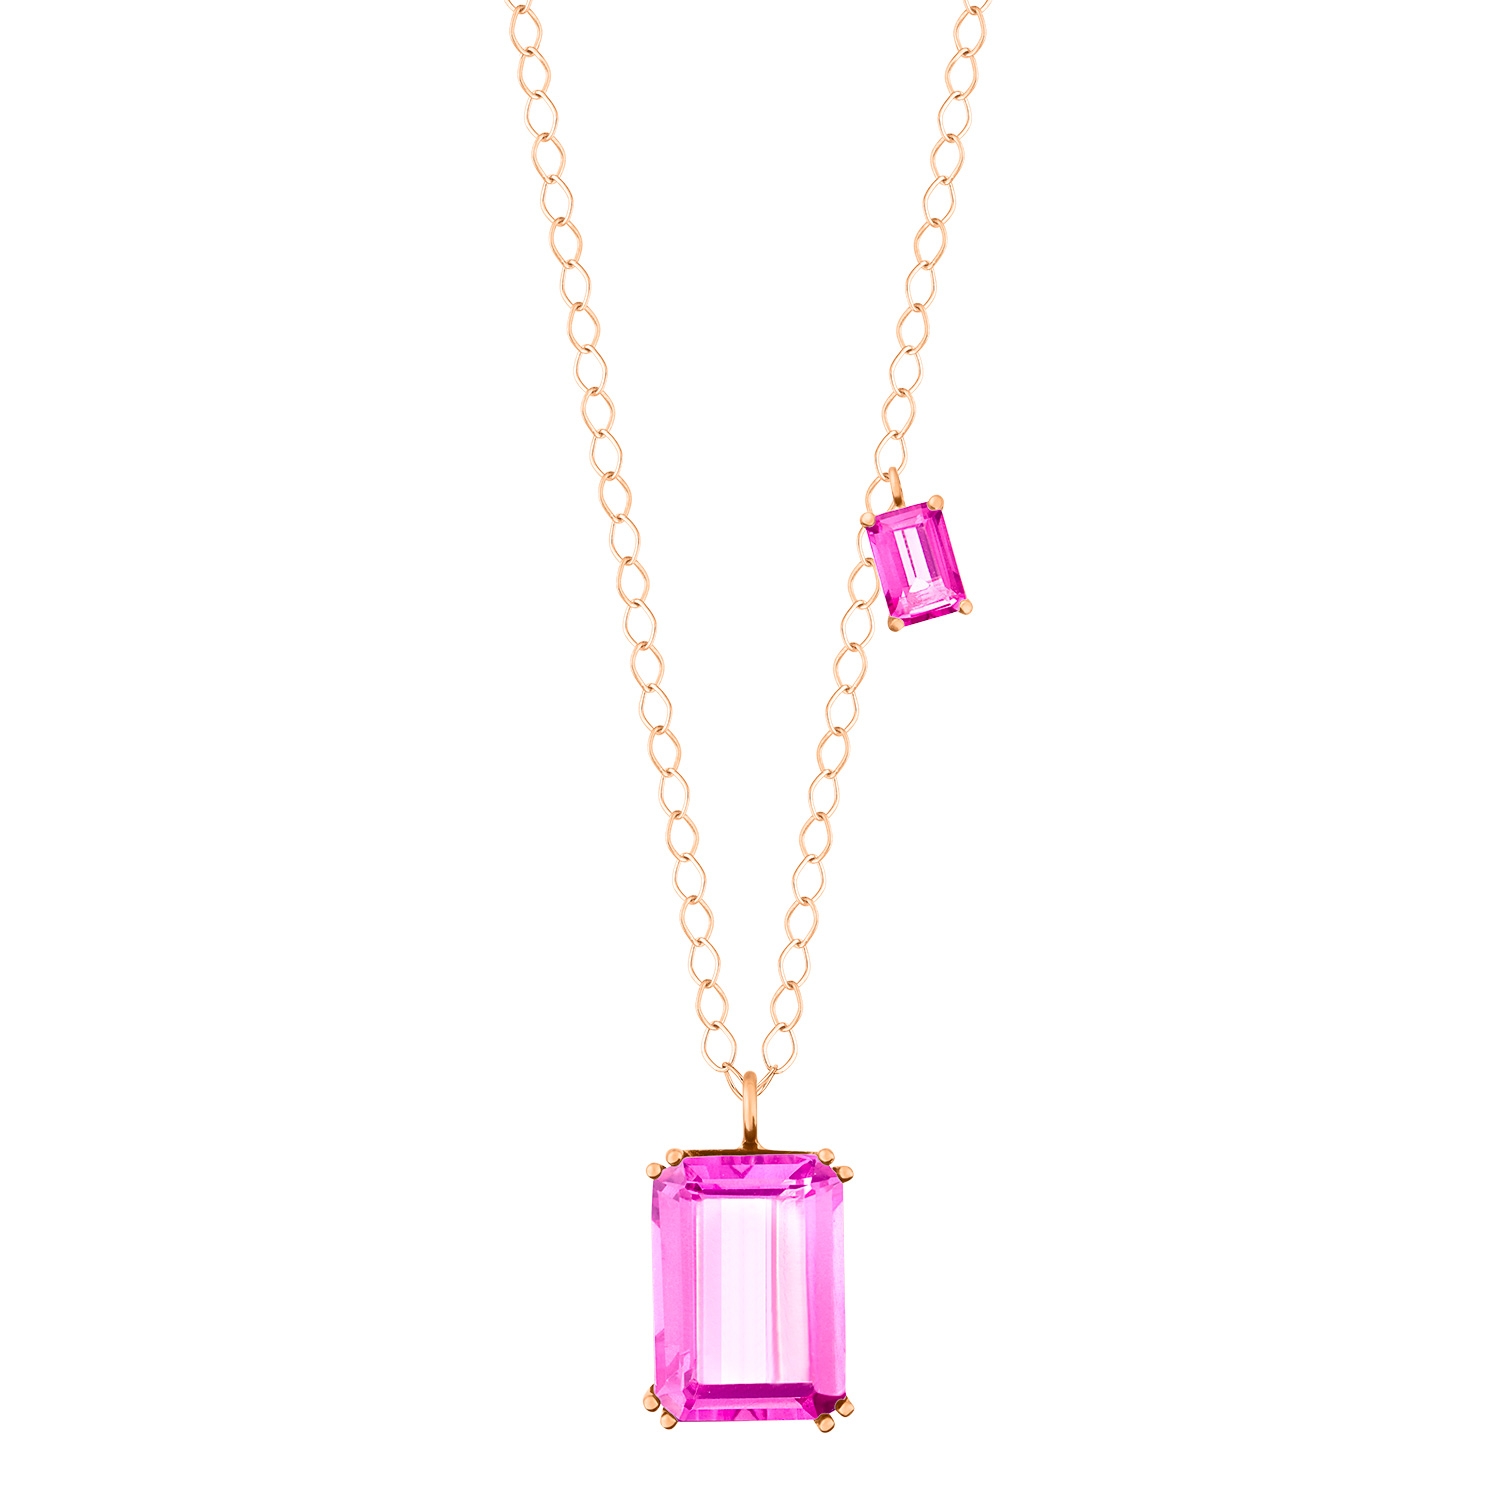 Bright Pink, Topaz Colorblock Tunic Necklace 